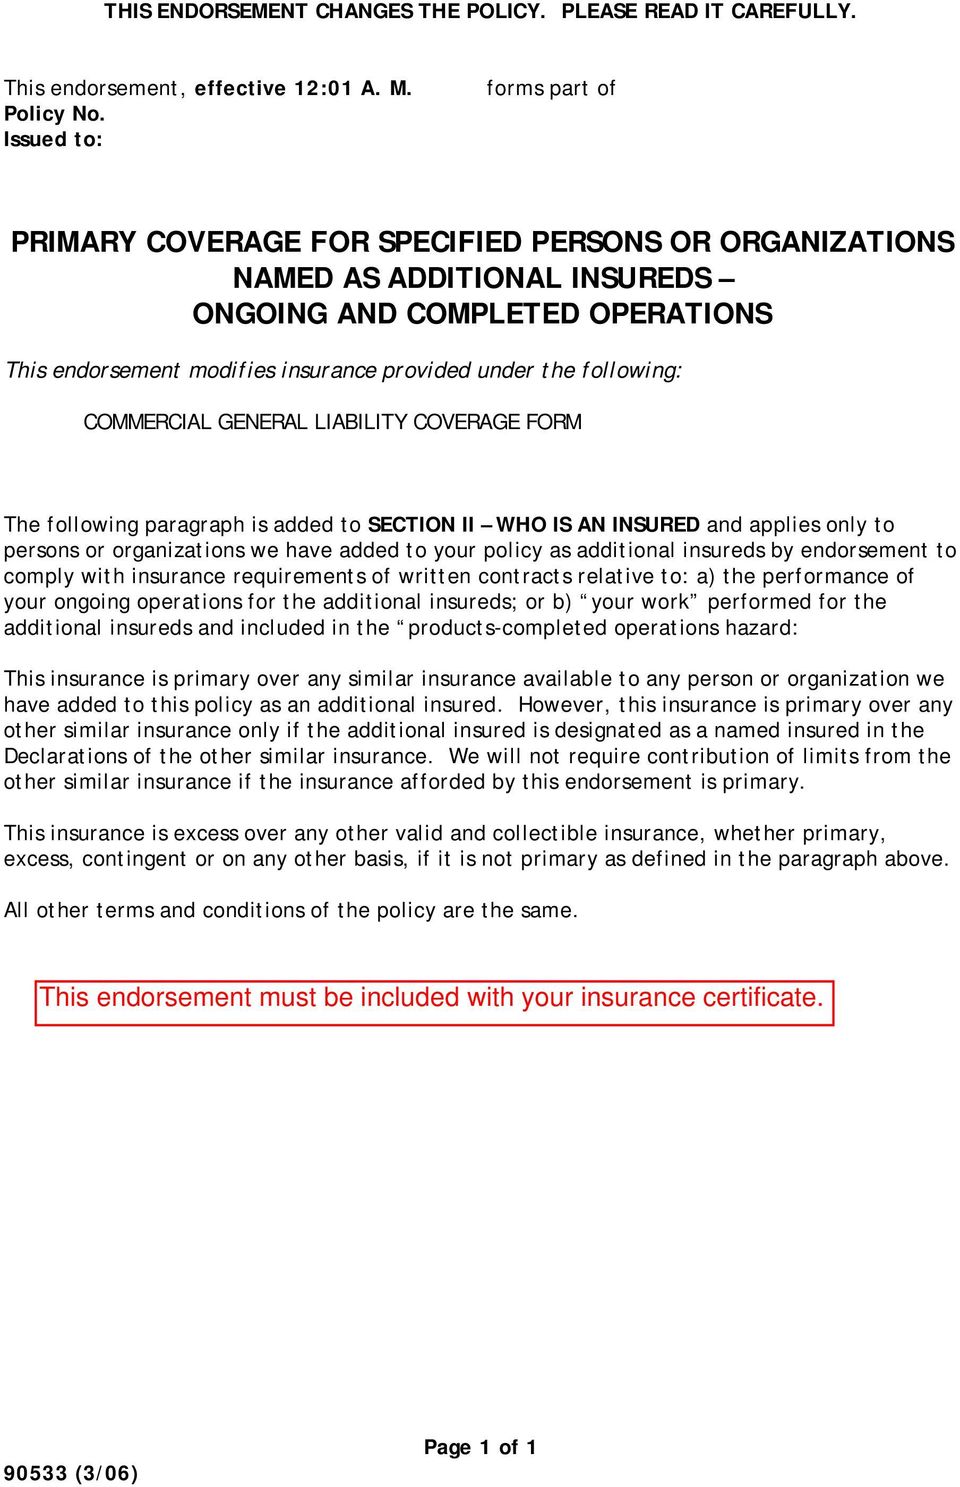 organizations we have added to your policy as additional insureds by endorsement to comply with insurance requirements of written contracts relative to: a) the performance of your ongoing operations